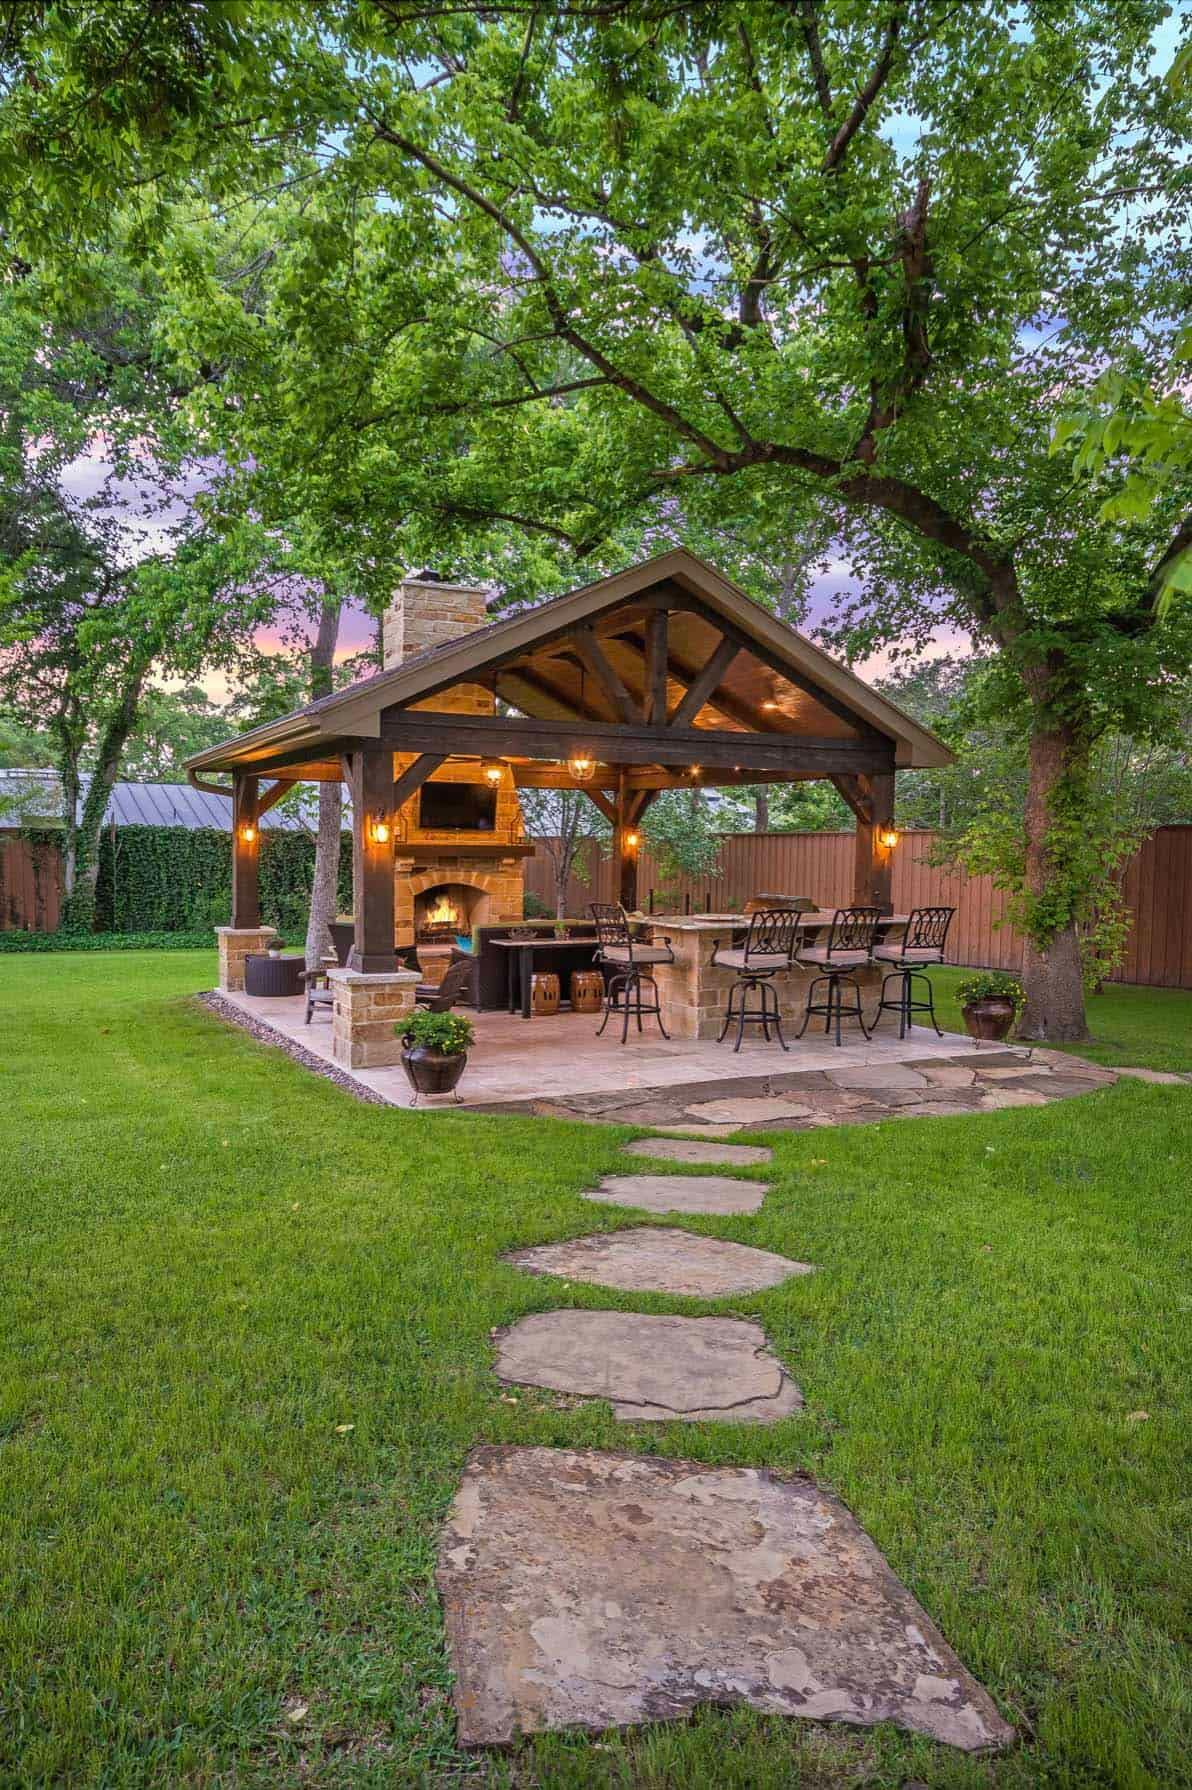 Transform Your Outdoor Space with Stunning Backyard Patio Designs